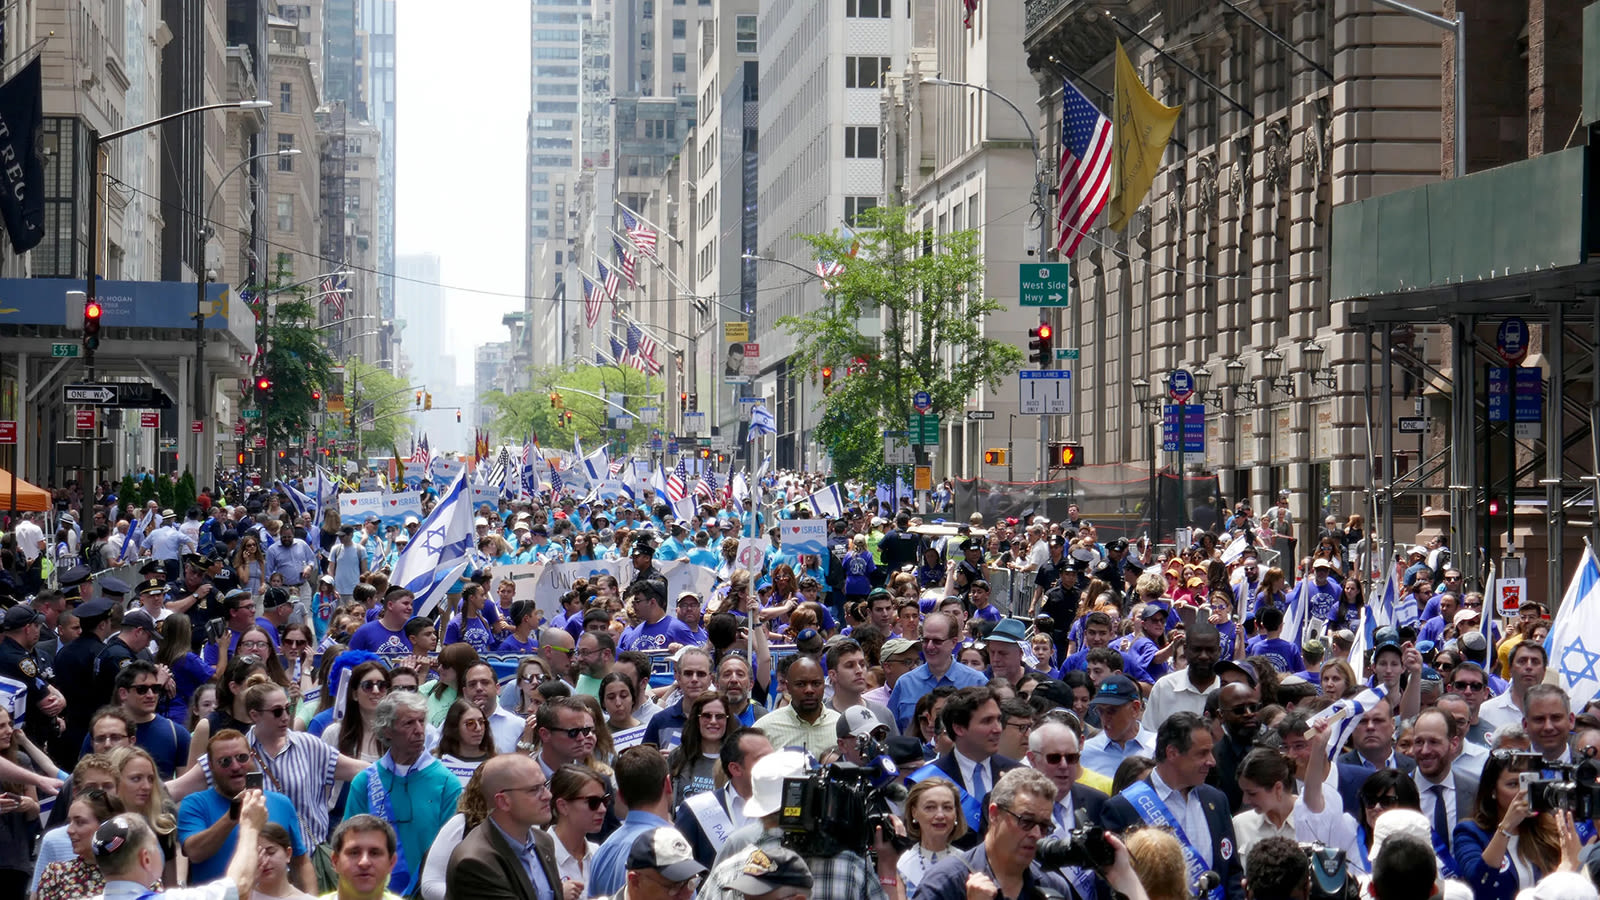 NYPD is on high alert for potential attacks on Israel Day parade Sunday